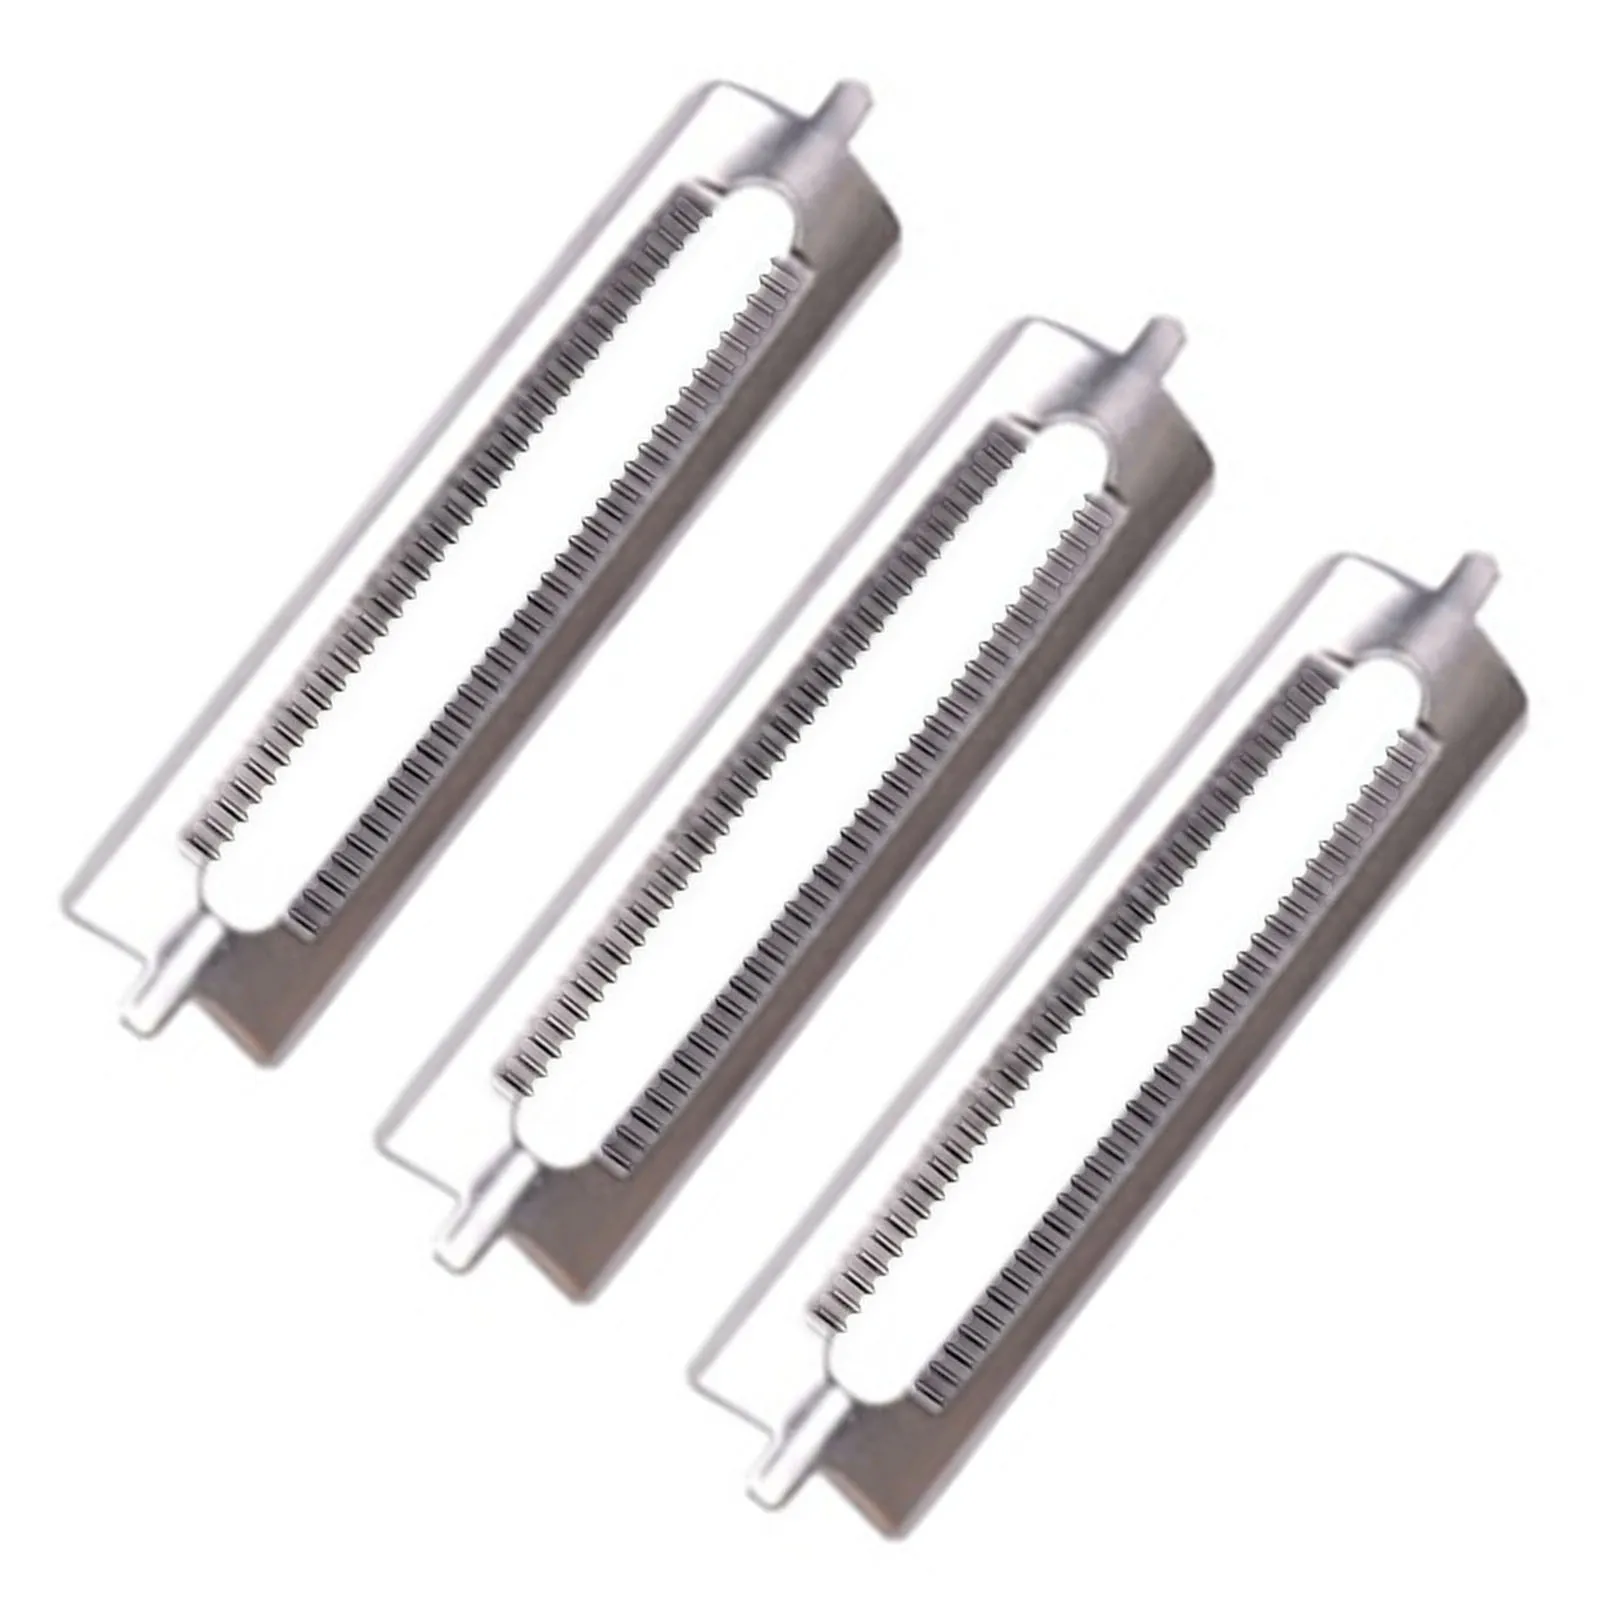 

3pcs Replacement Dental Blades For Double Peeler And Single Peeler Asparagus Peeler 56 X 9 X 2 Mm Stainless Steel Blades